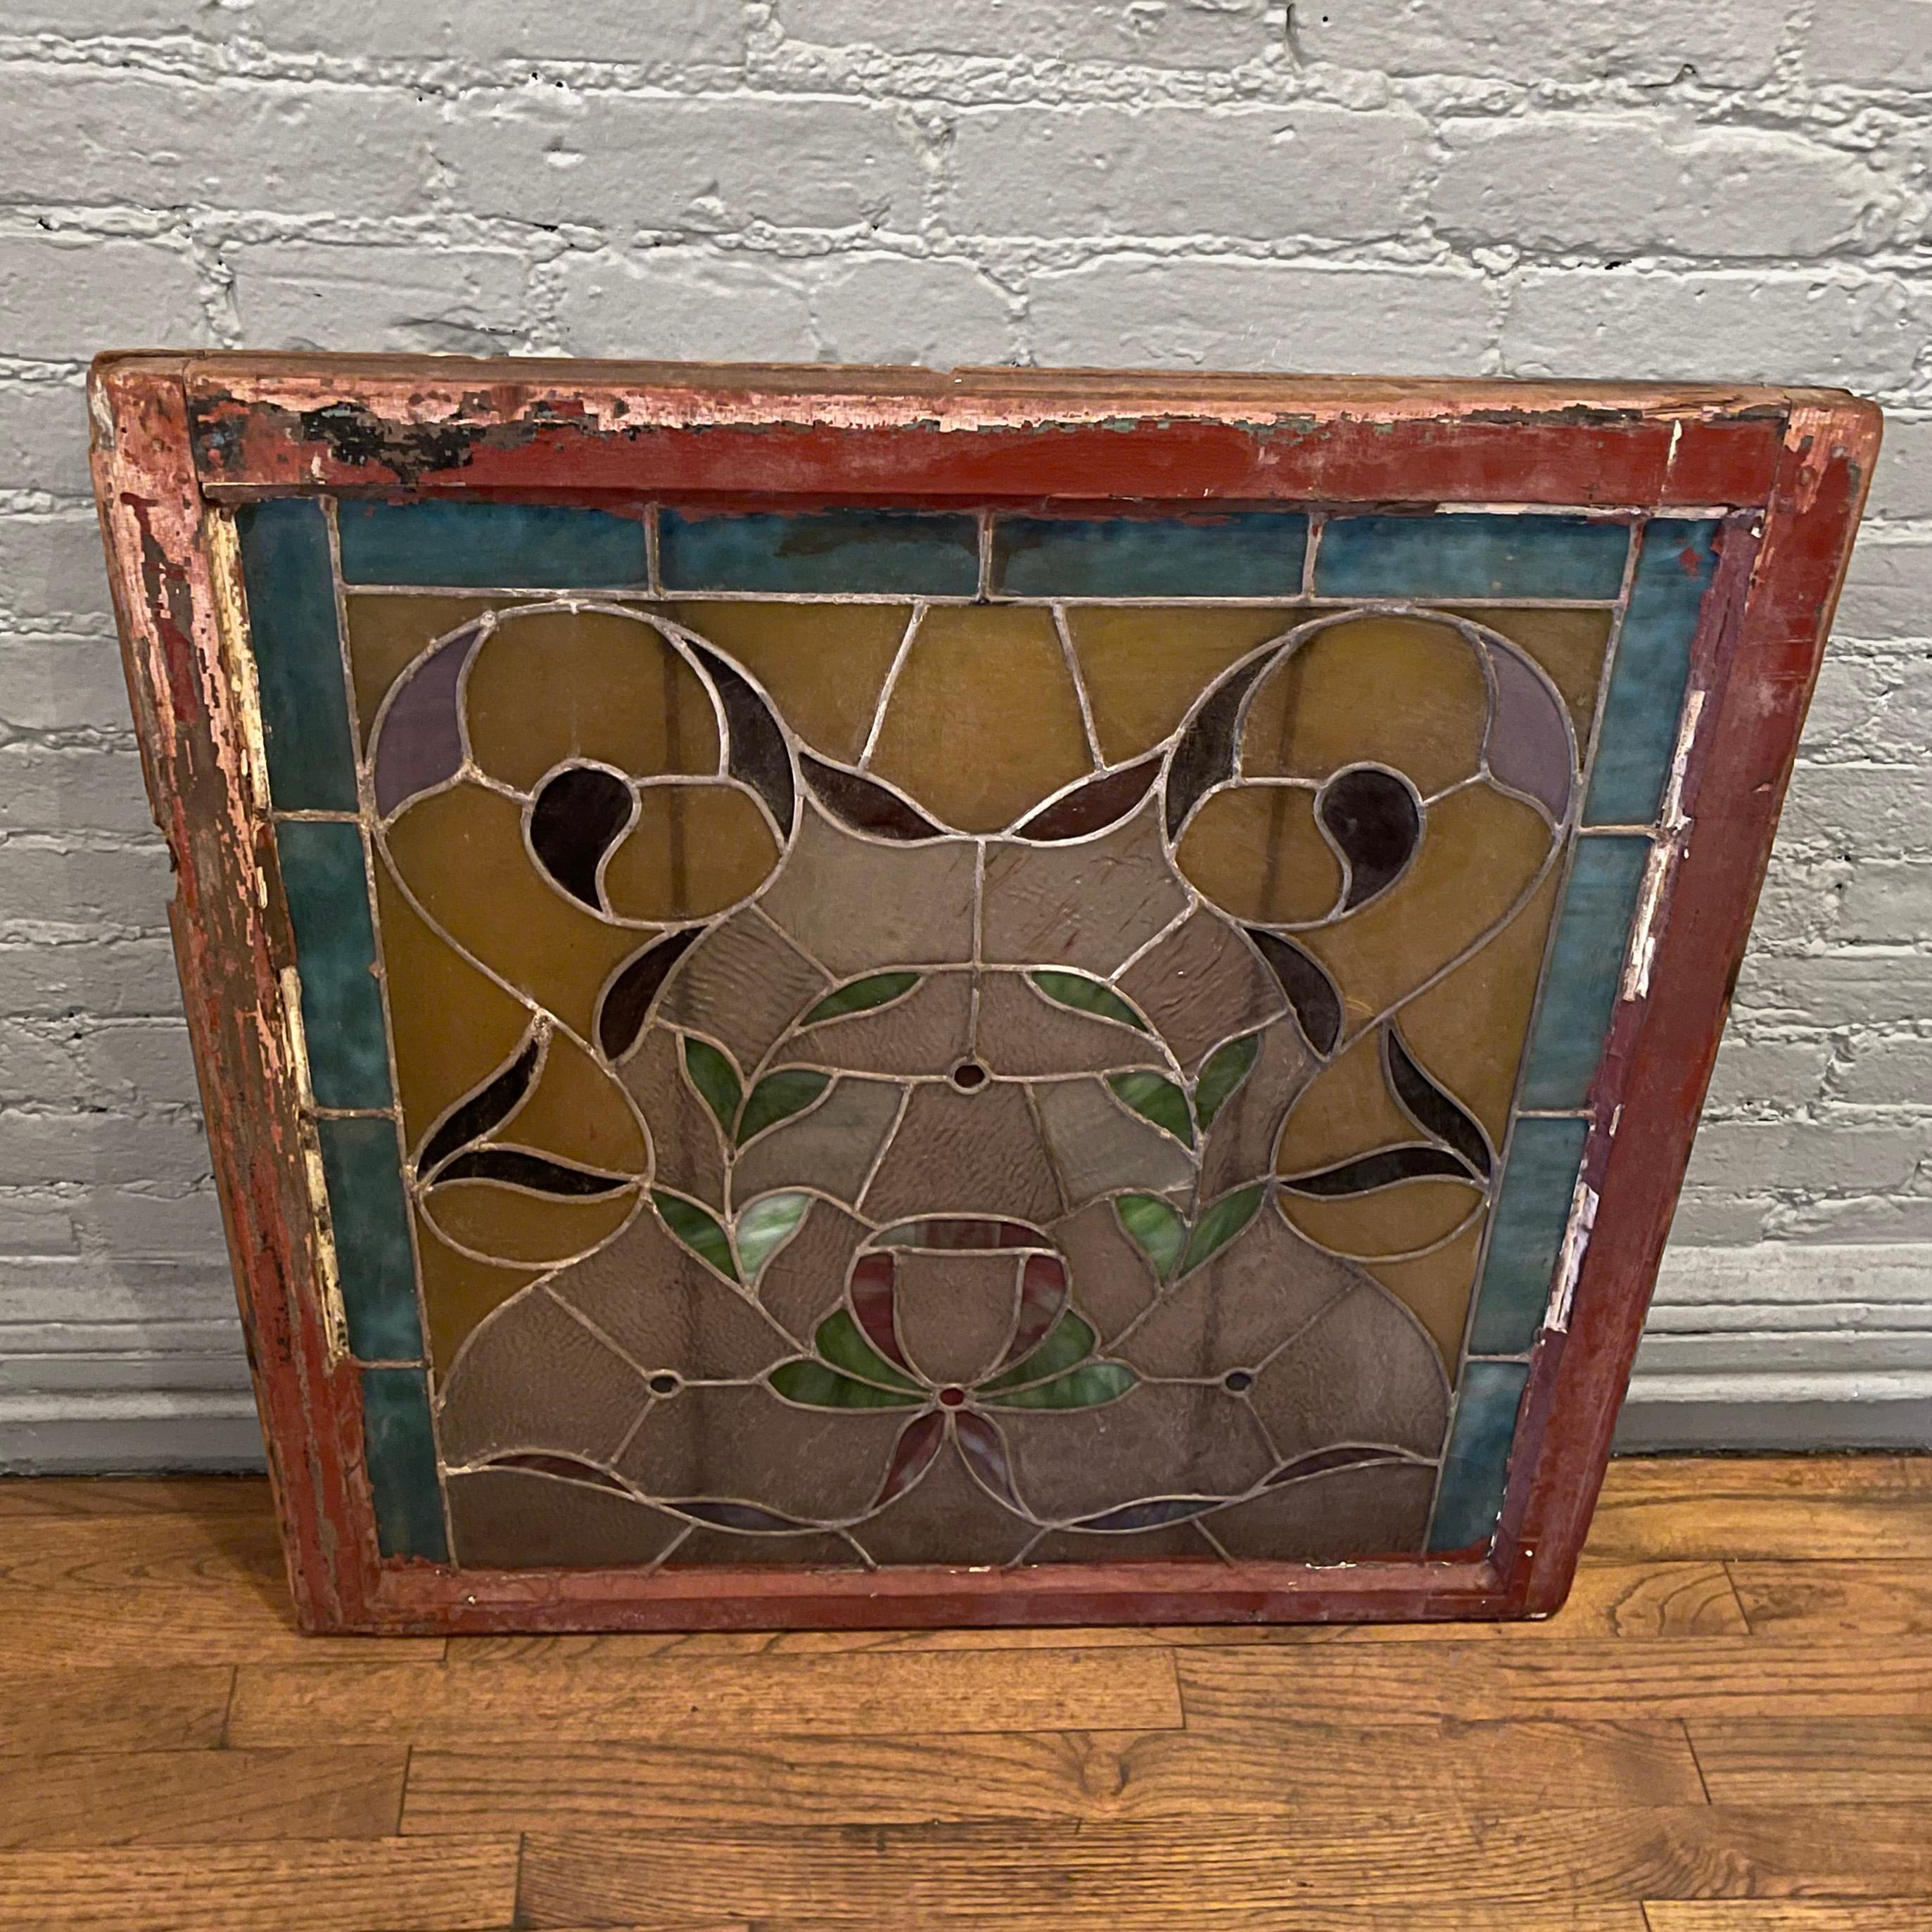 American Arts & Crafts Stained Glass Window Panel